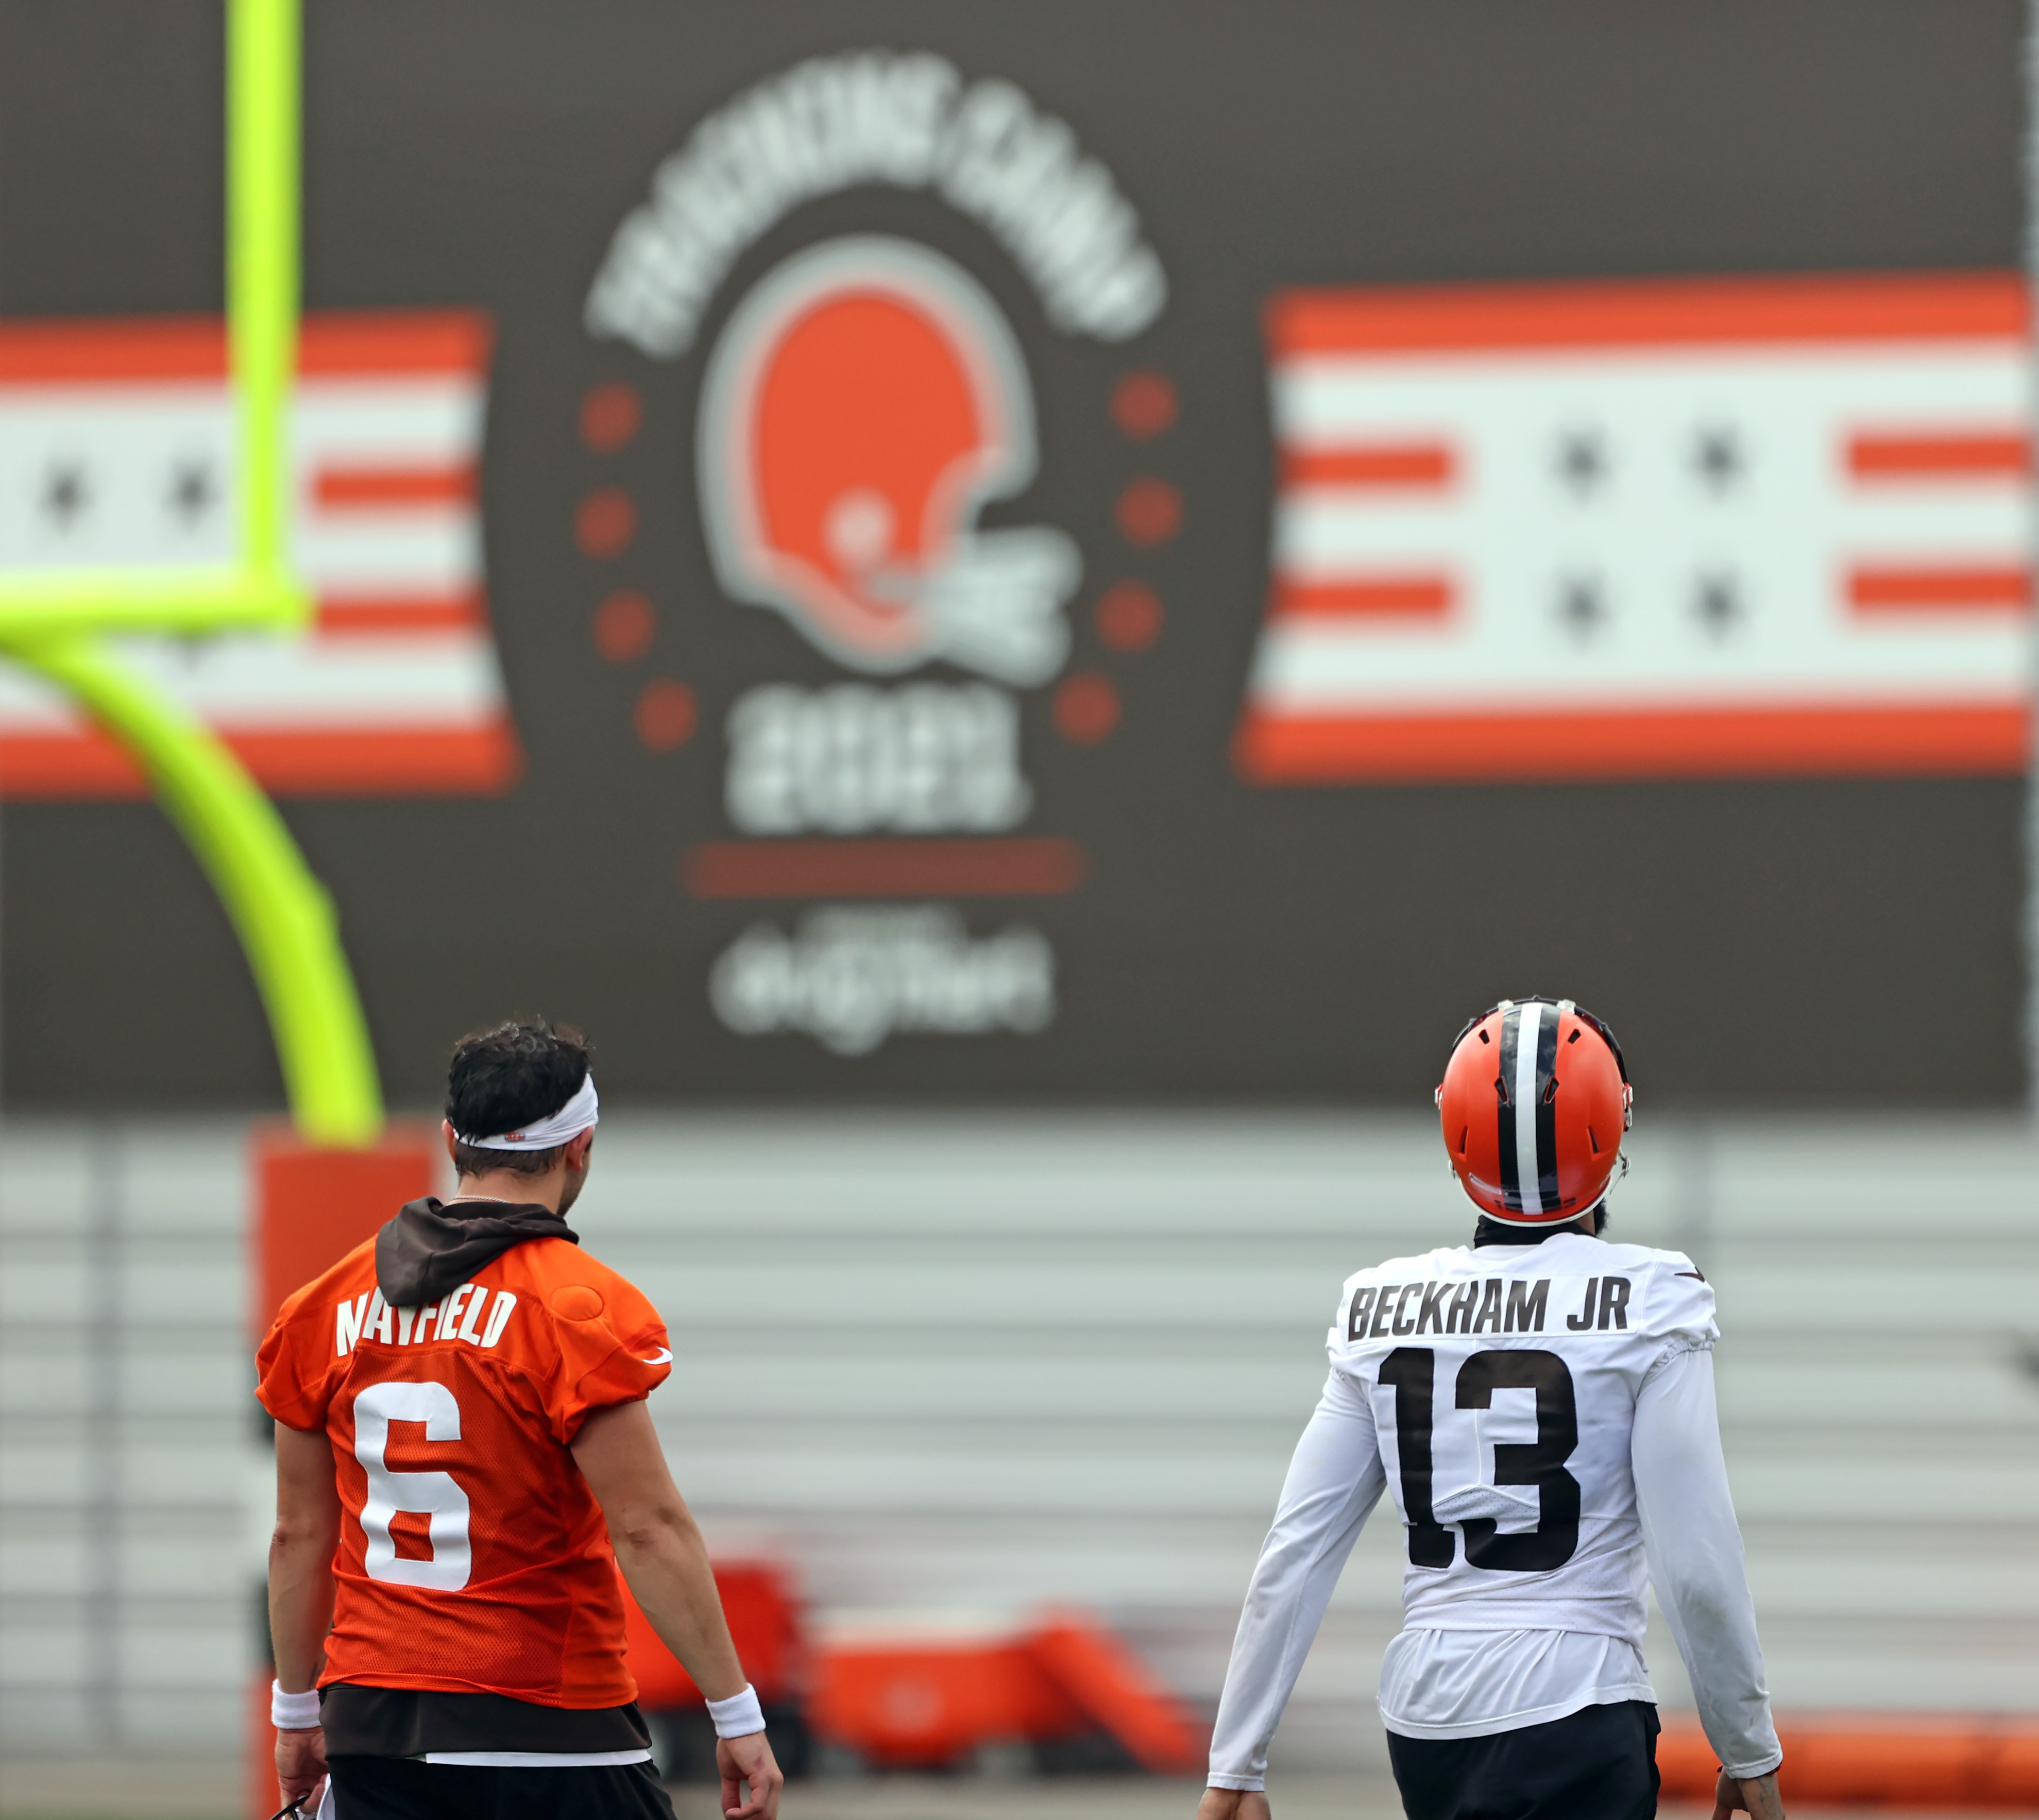 While backing off his 2020 vow, Browns' Odell Beckham Jr. ready to run